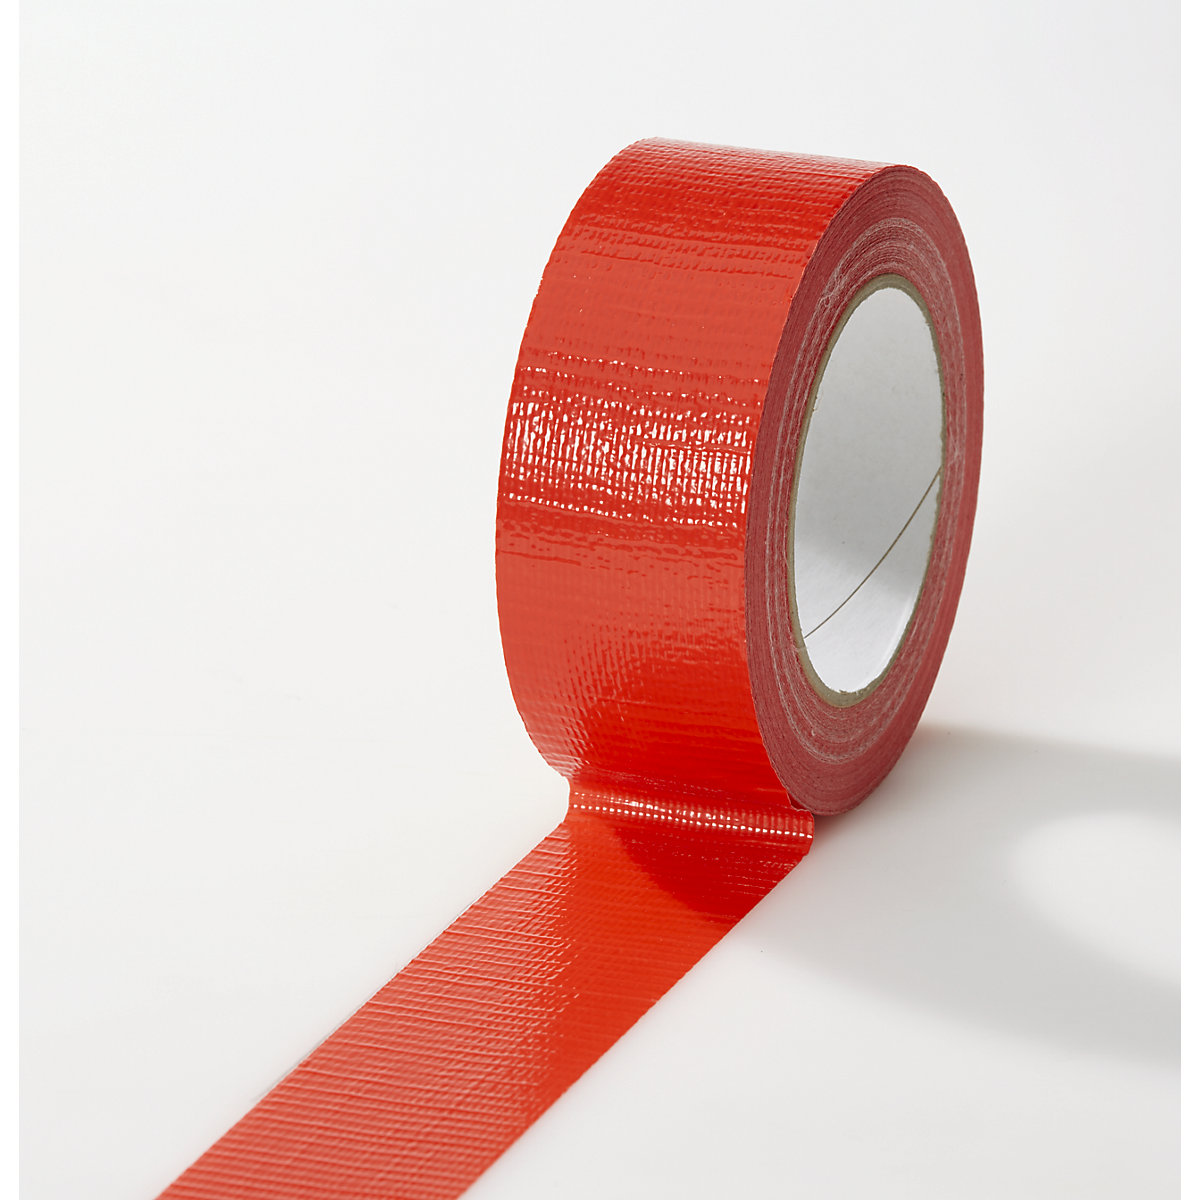 Fabric tape, in different colours, pack of 24 rolls, red, tape width 38 mm-11